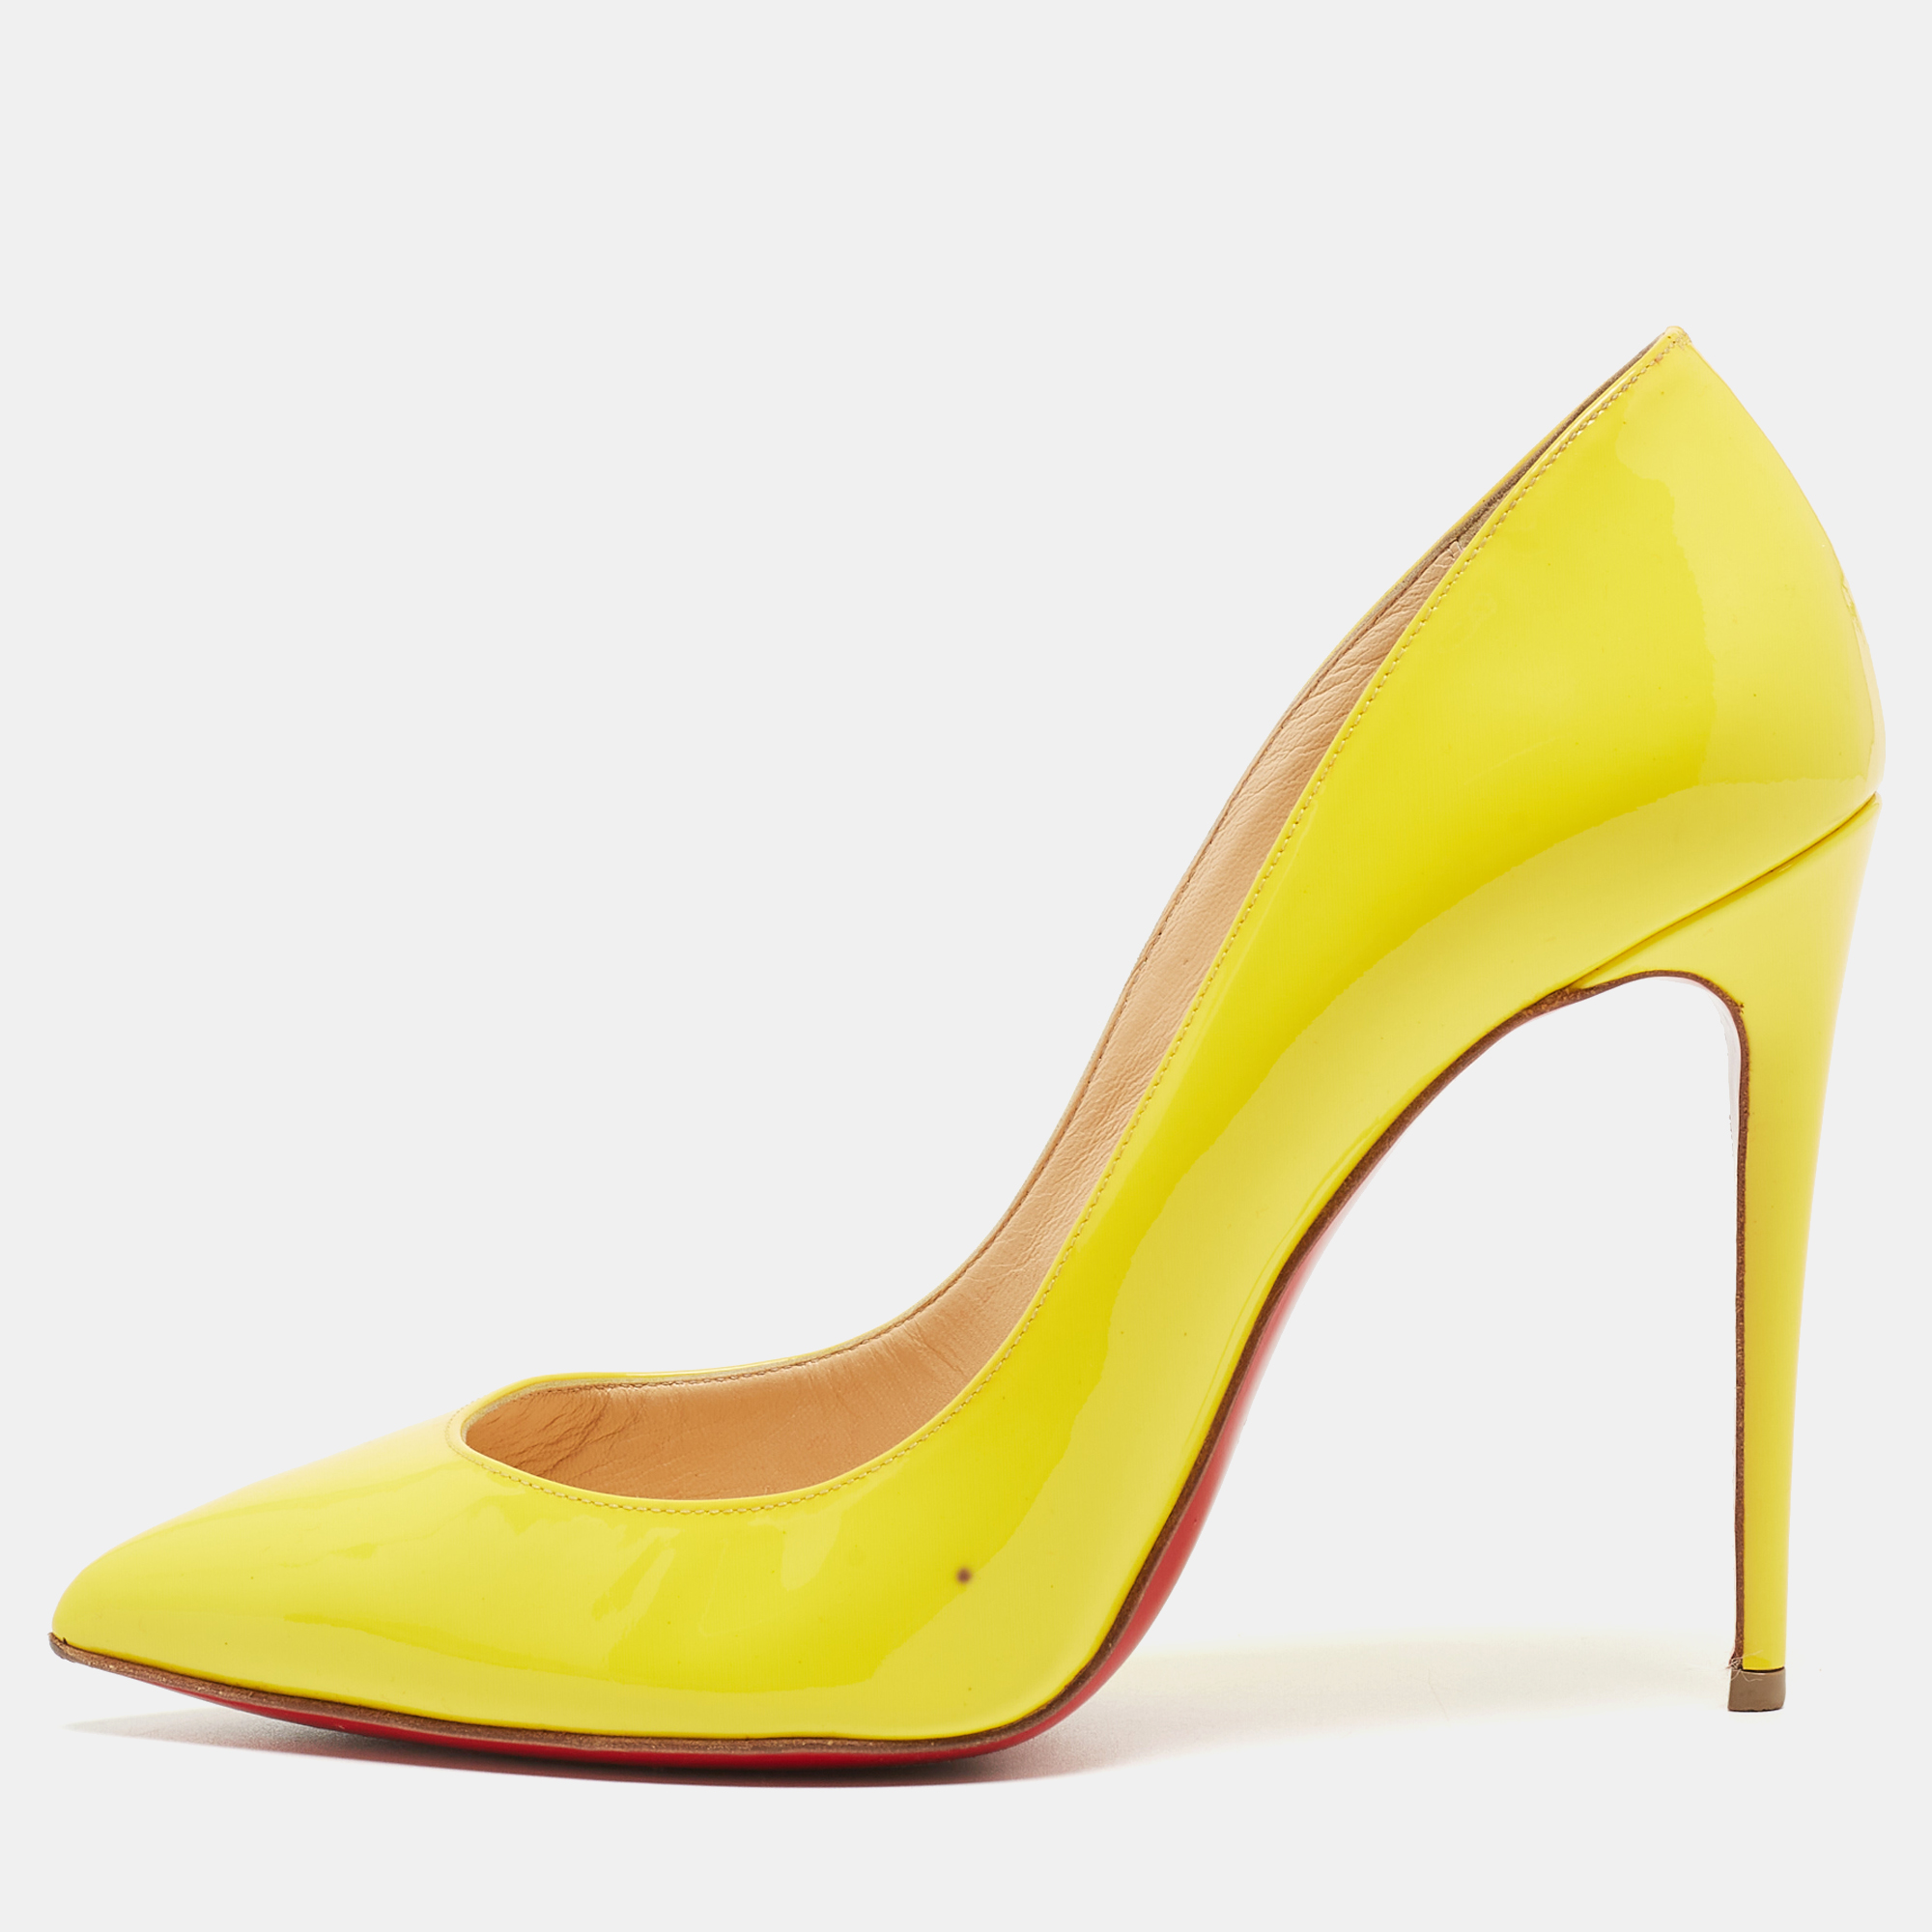 Pre-owned Christian Louboutin Yellow Patent Leather Pigalle Follies Pumps Size 37.5